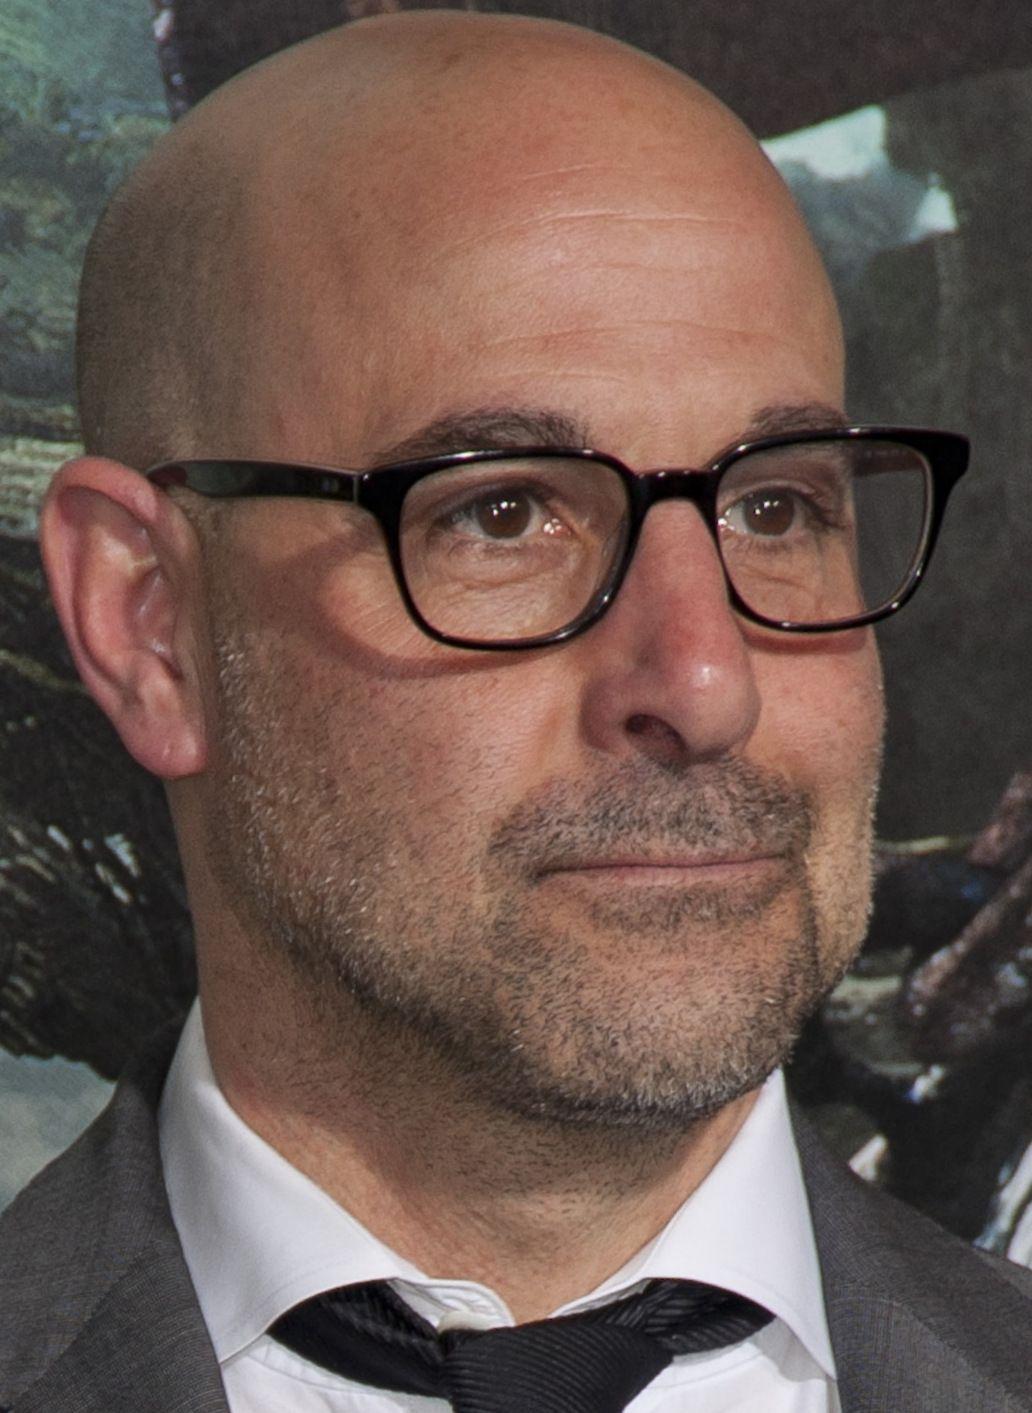 Stanley Tucci Joins Transformers 4